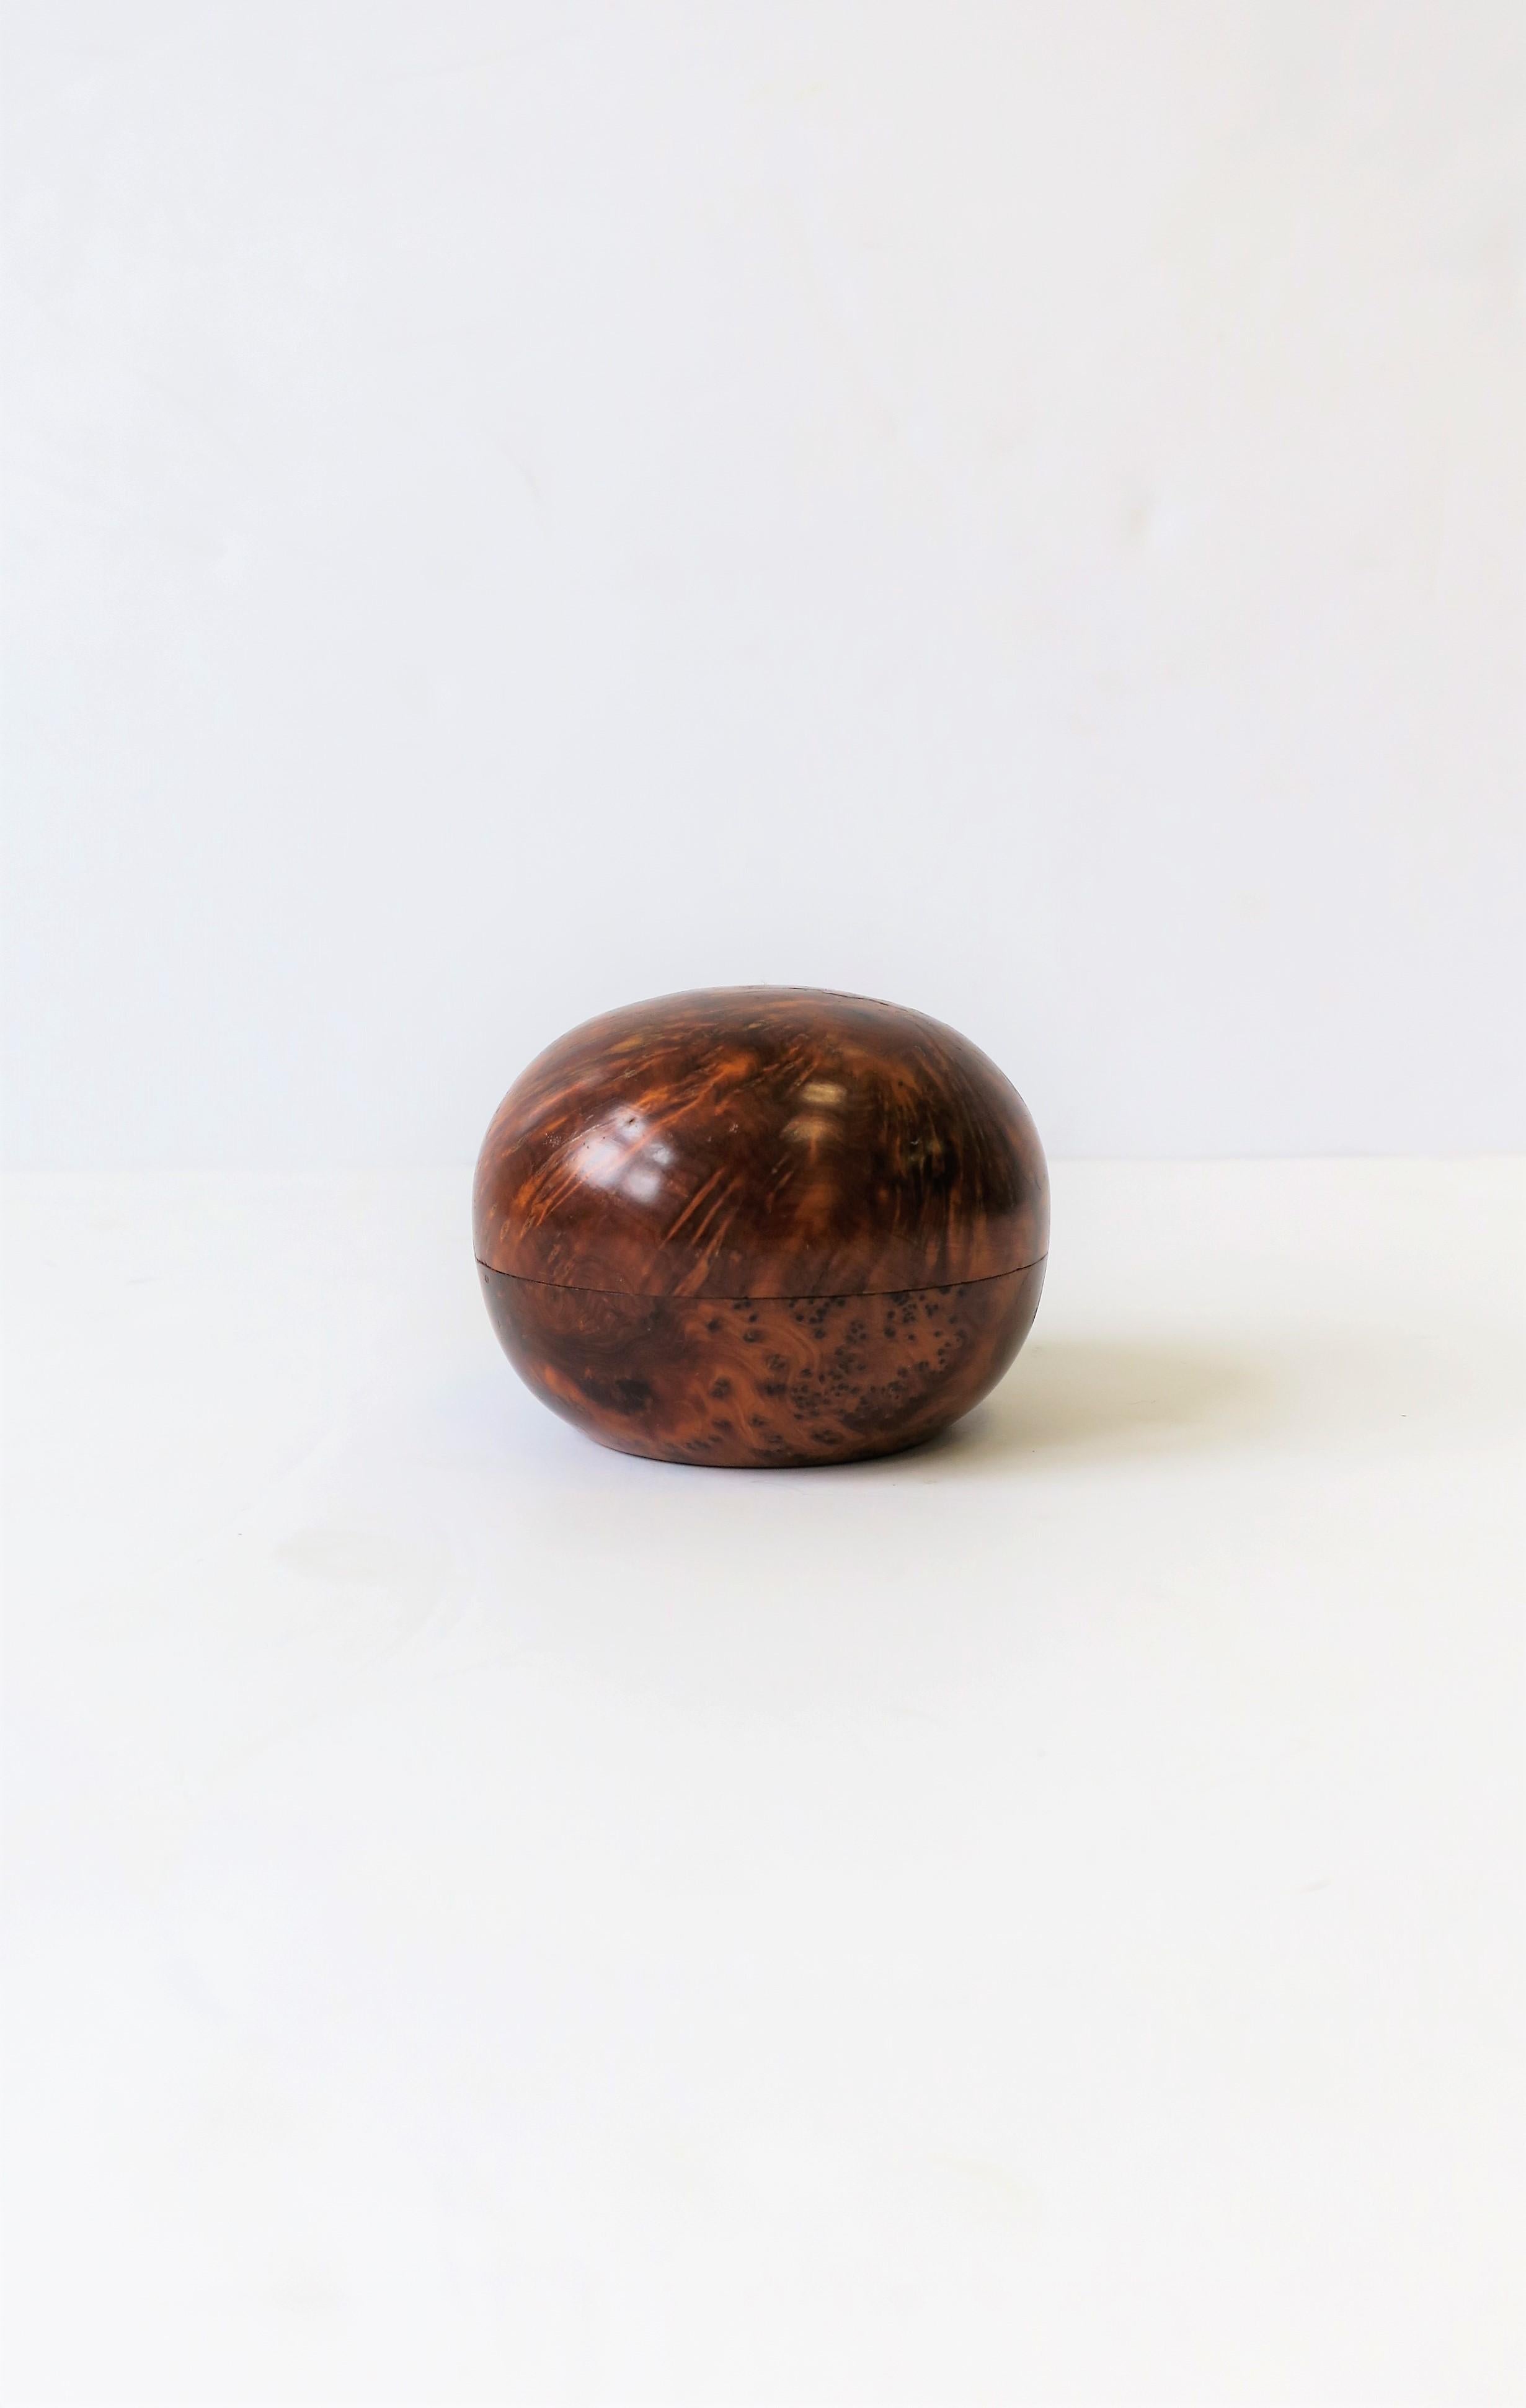 A small round burl wood trinket or jewelry box. Perfect to hold small items on a desk, vanity area, etc. Dimensions: 2.75